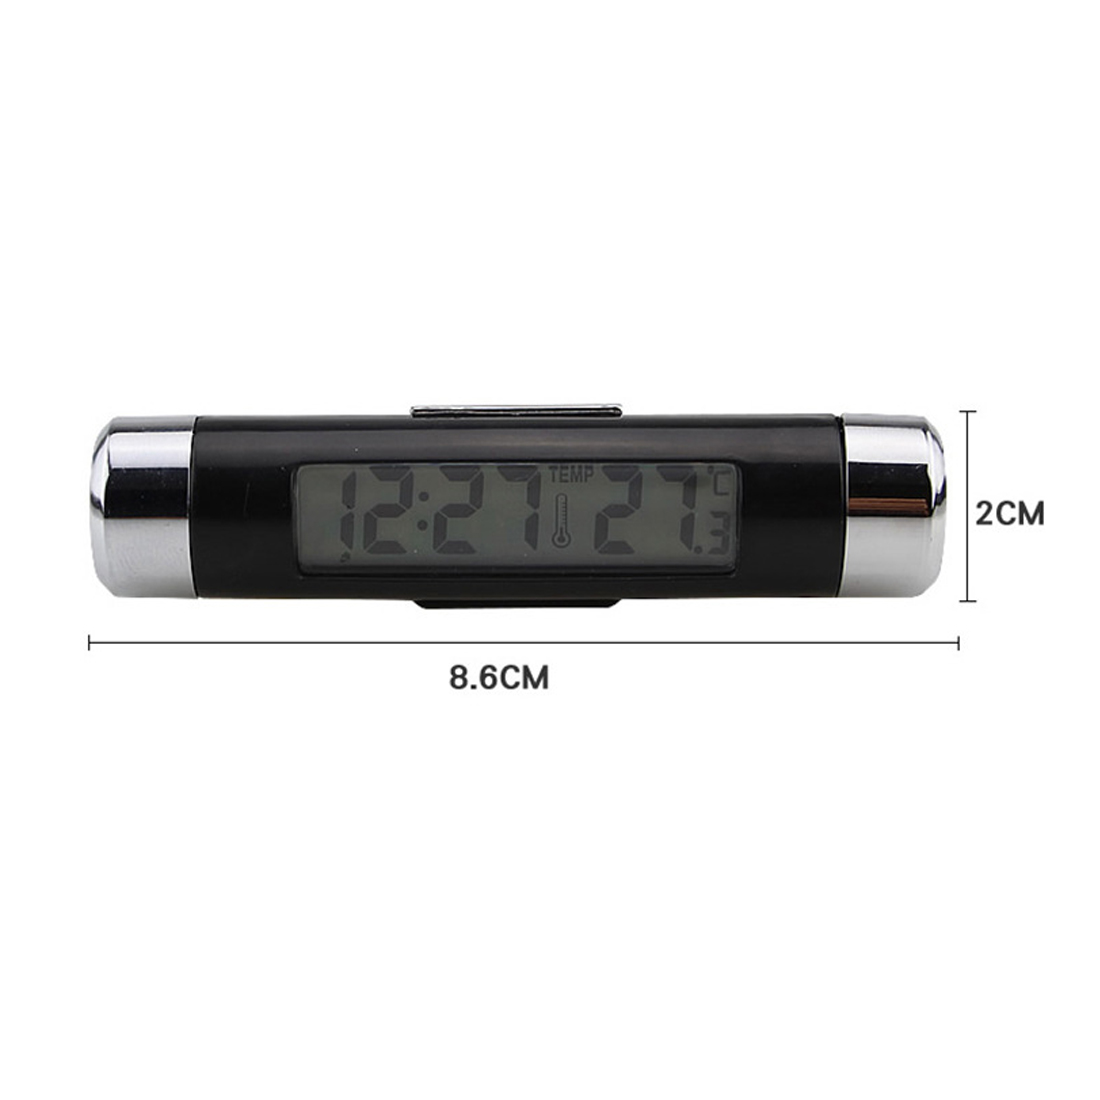 High-2-in-1-Digital-LCD-Display-Screen-Hygrometer-Thermometer-Car-Time-Clock-Car-Styling-Blue-Backli-1370443